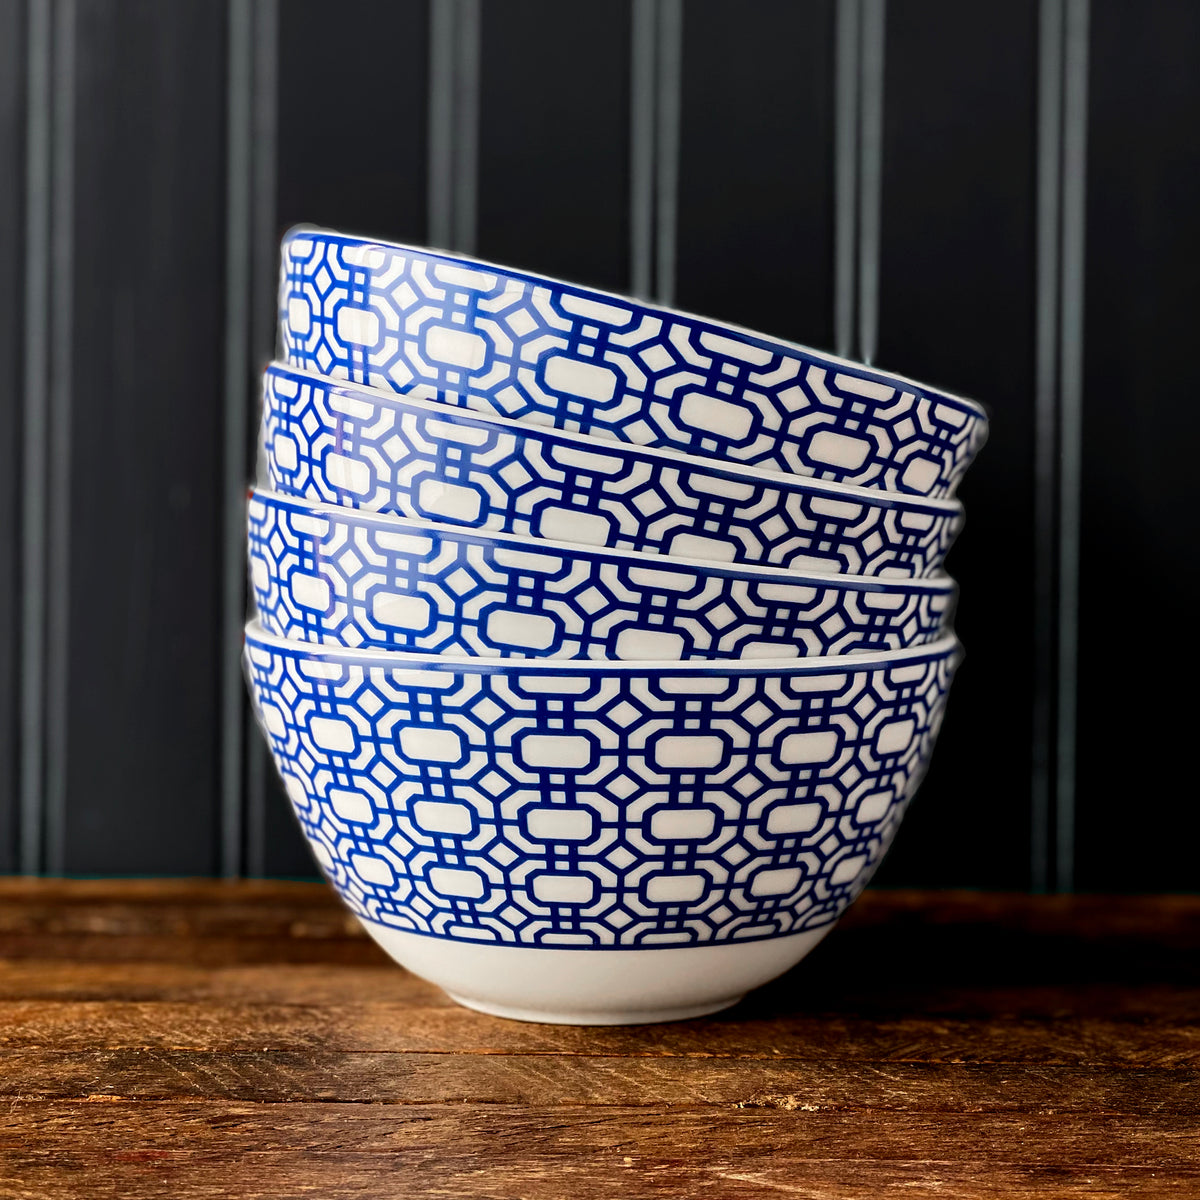 A stack of four blue and white patterned Newport Cereal Bowls by Caskata Artisanal Home, reminiscent of the Newport Garden Gate design, is placed on a wooden surface with a dark, vertically paneled background.